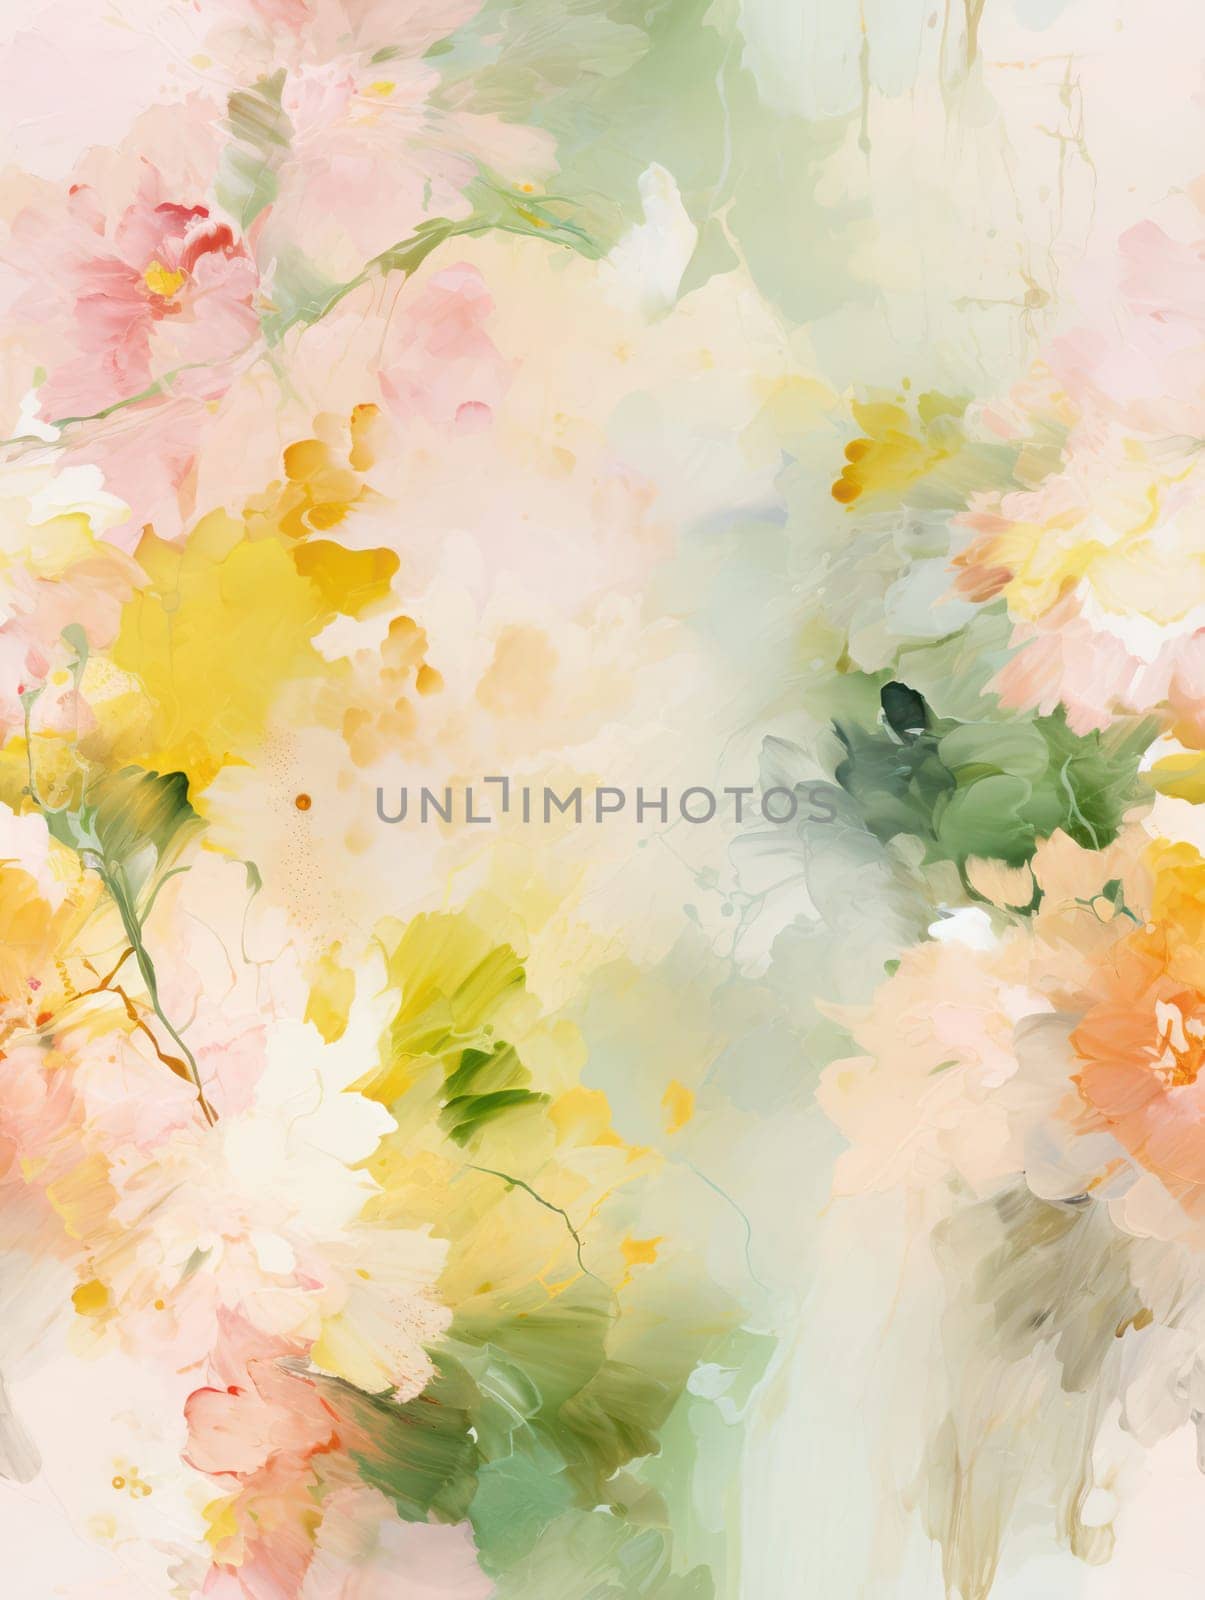 Watercolor Floral Art: Blossoming Spring Bouquet on Abstract Nature Background by Vichizh